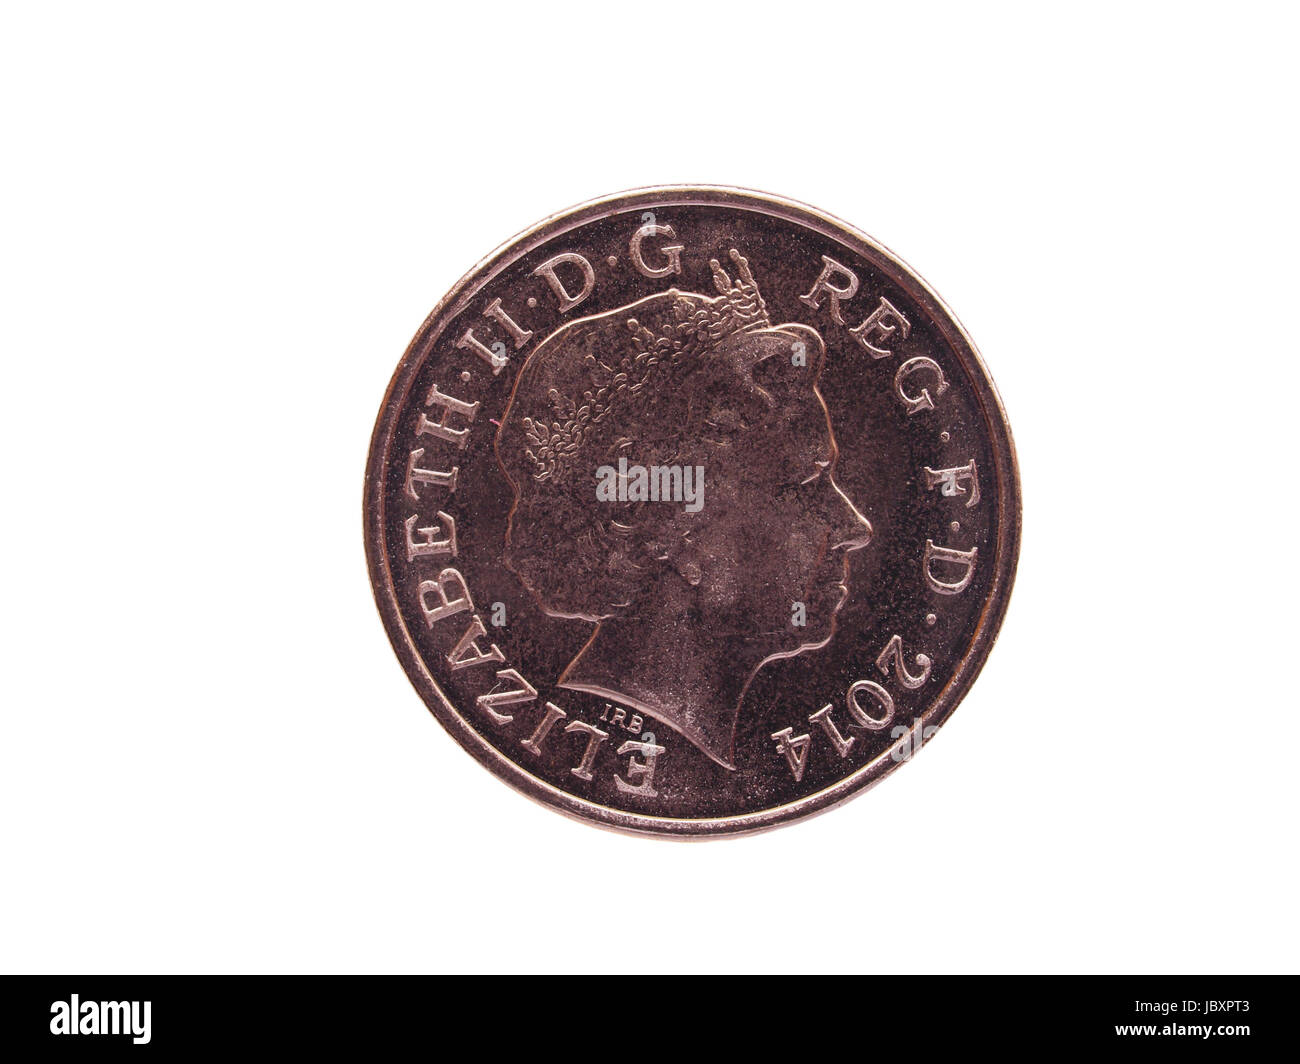 LONDON, UK - JUNE 28, 2014: One Pence coin currency of the United Kingdom with HM the Queen Elizabeth II Stock Photo